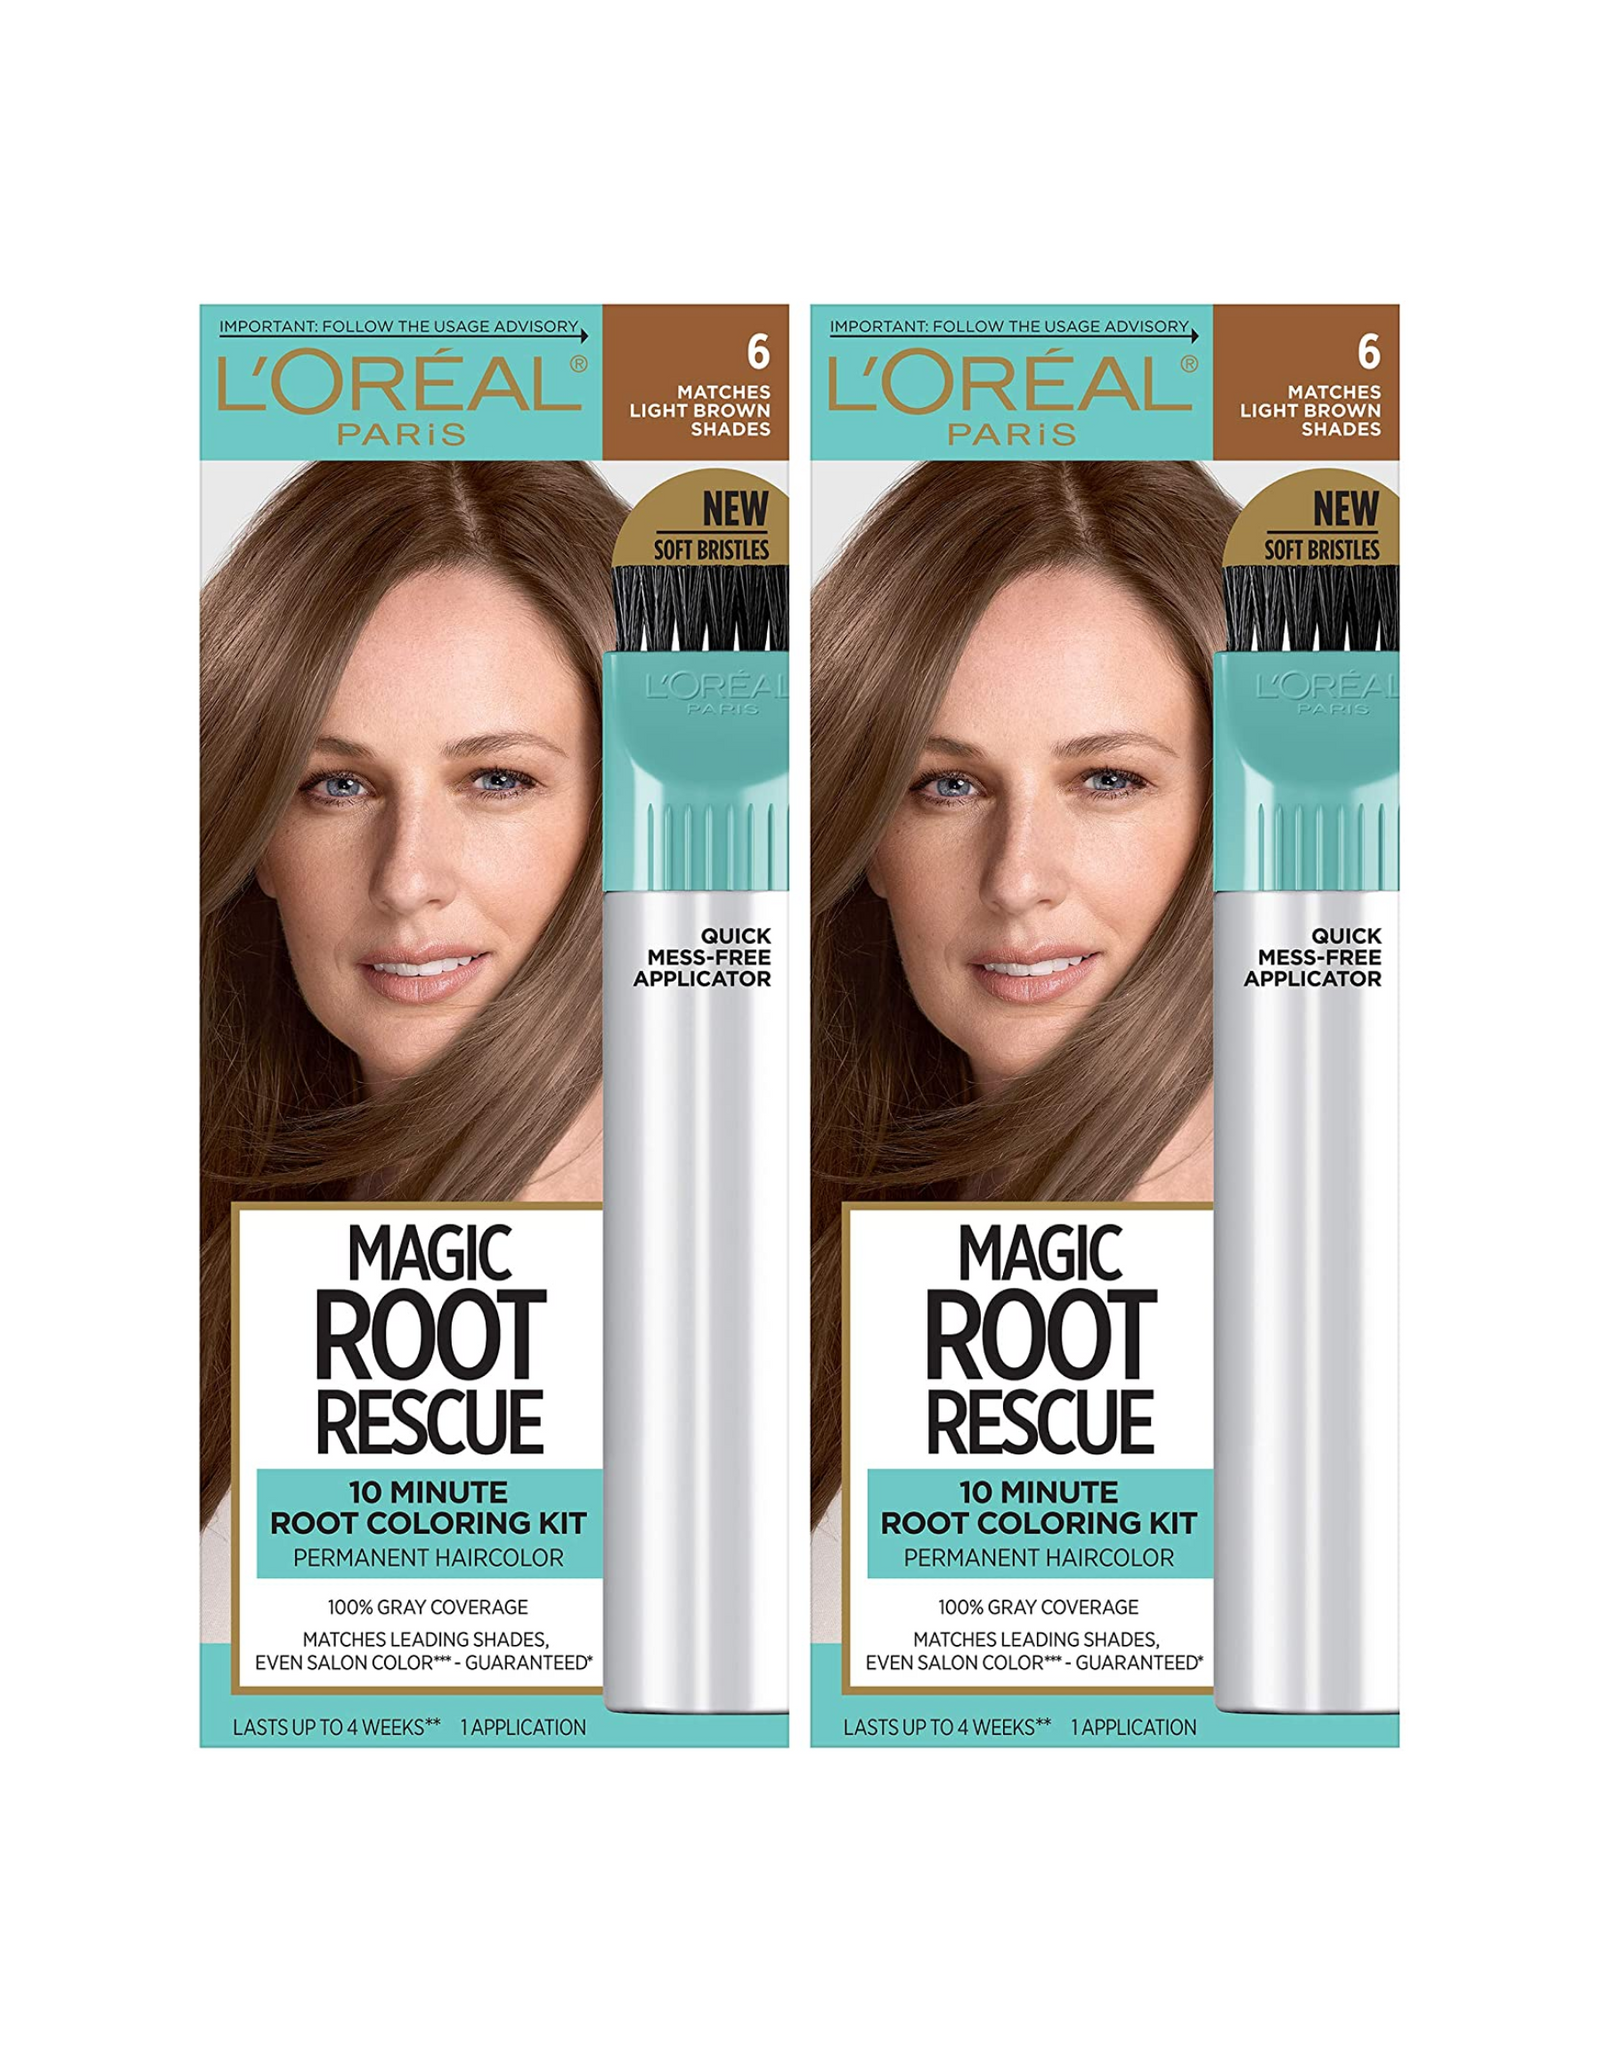 L'Oreal Paris Magic Root Rescue 10 Minute Root Coloring Kit for Hair, 6 Matches Light Brown Shades, 2 Ct (Pack of 1)